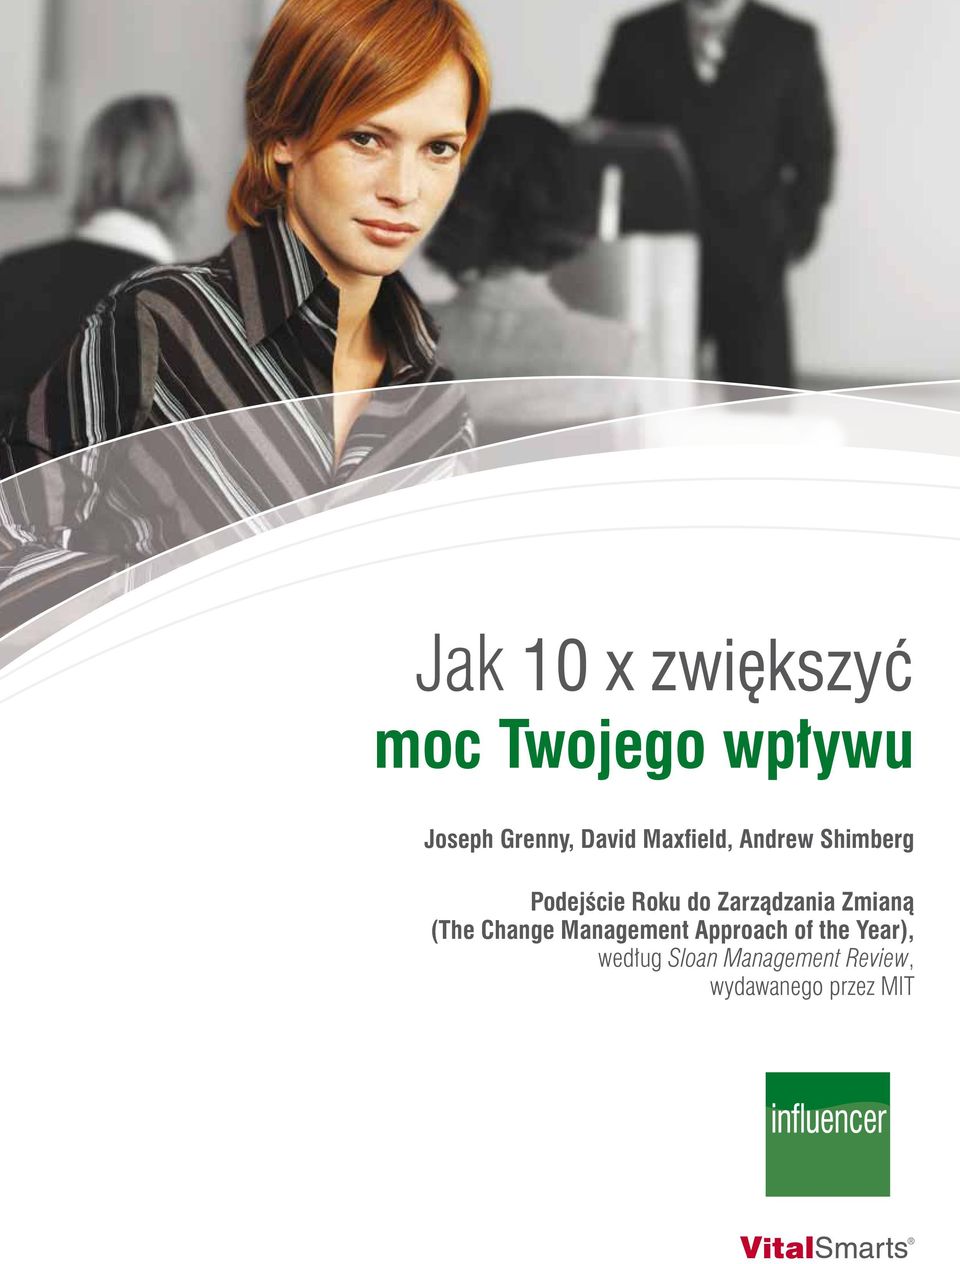 (The Change Management Approach of the Year), według Sloan